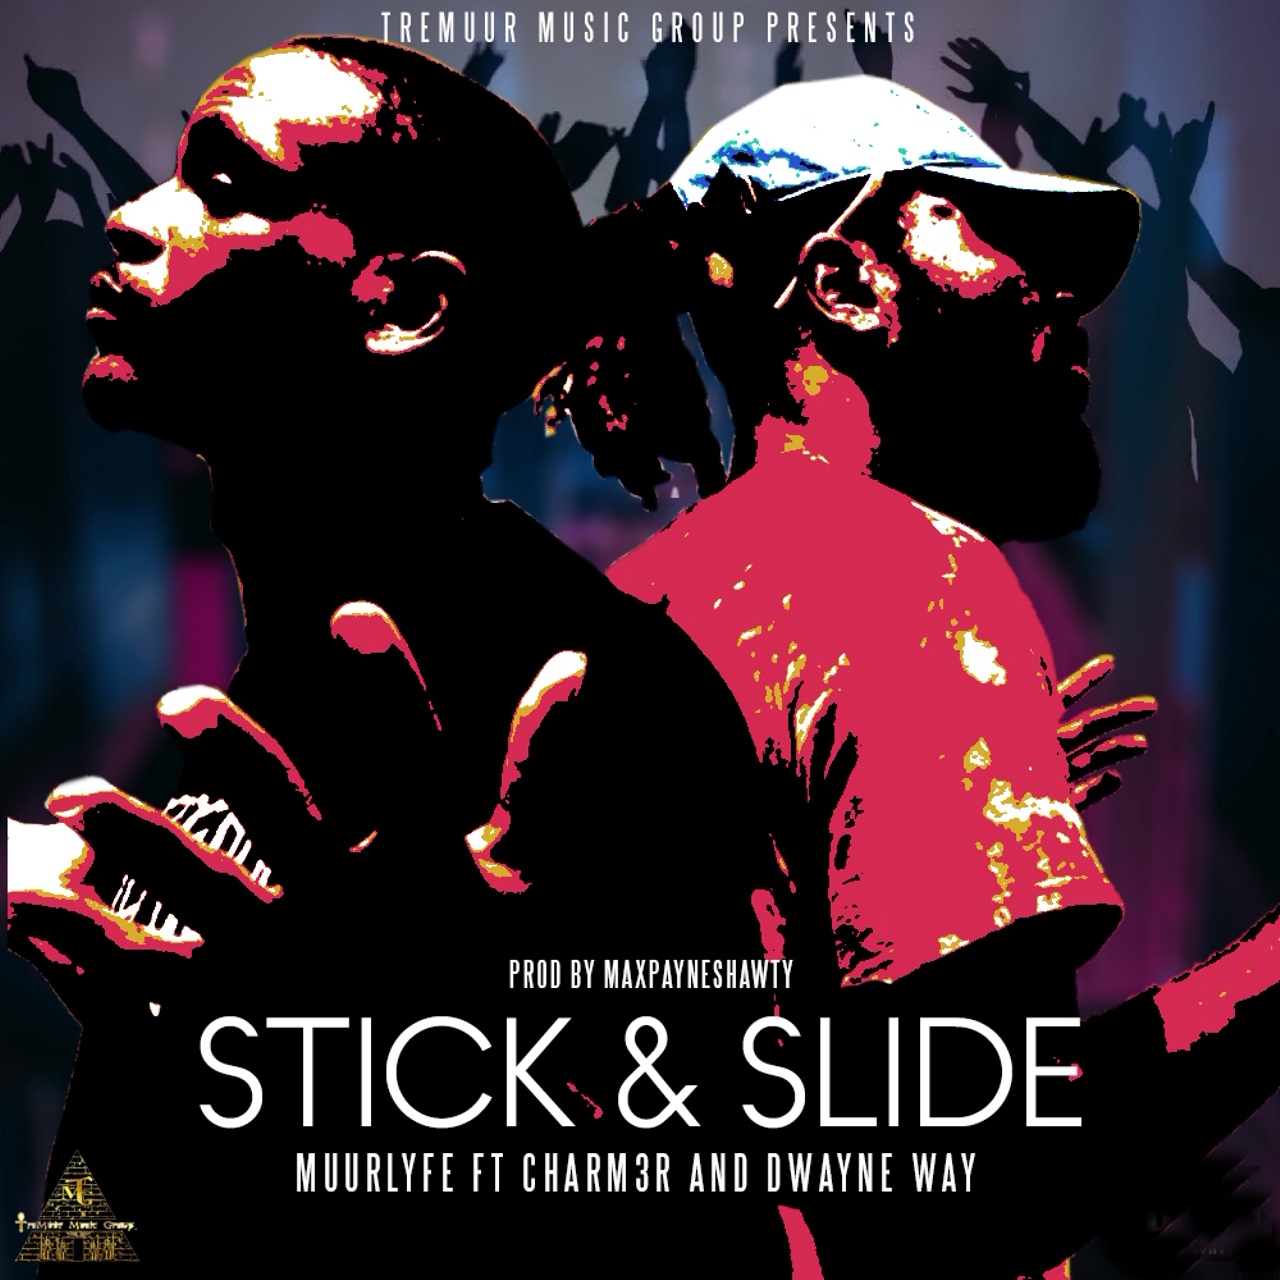 MuurLyfe taps into the summer vibes with new single “Stick & Slide” @tremuur